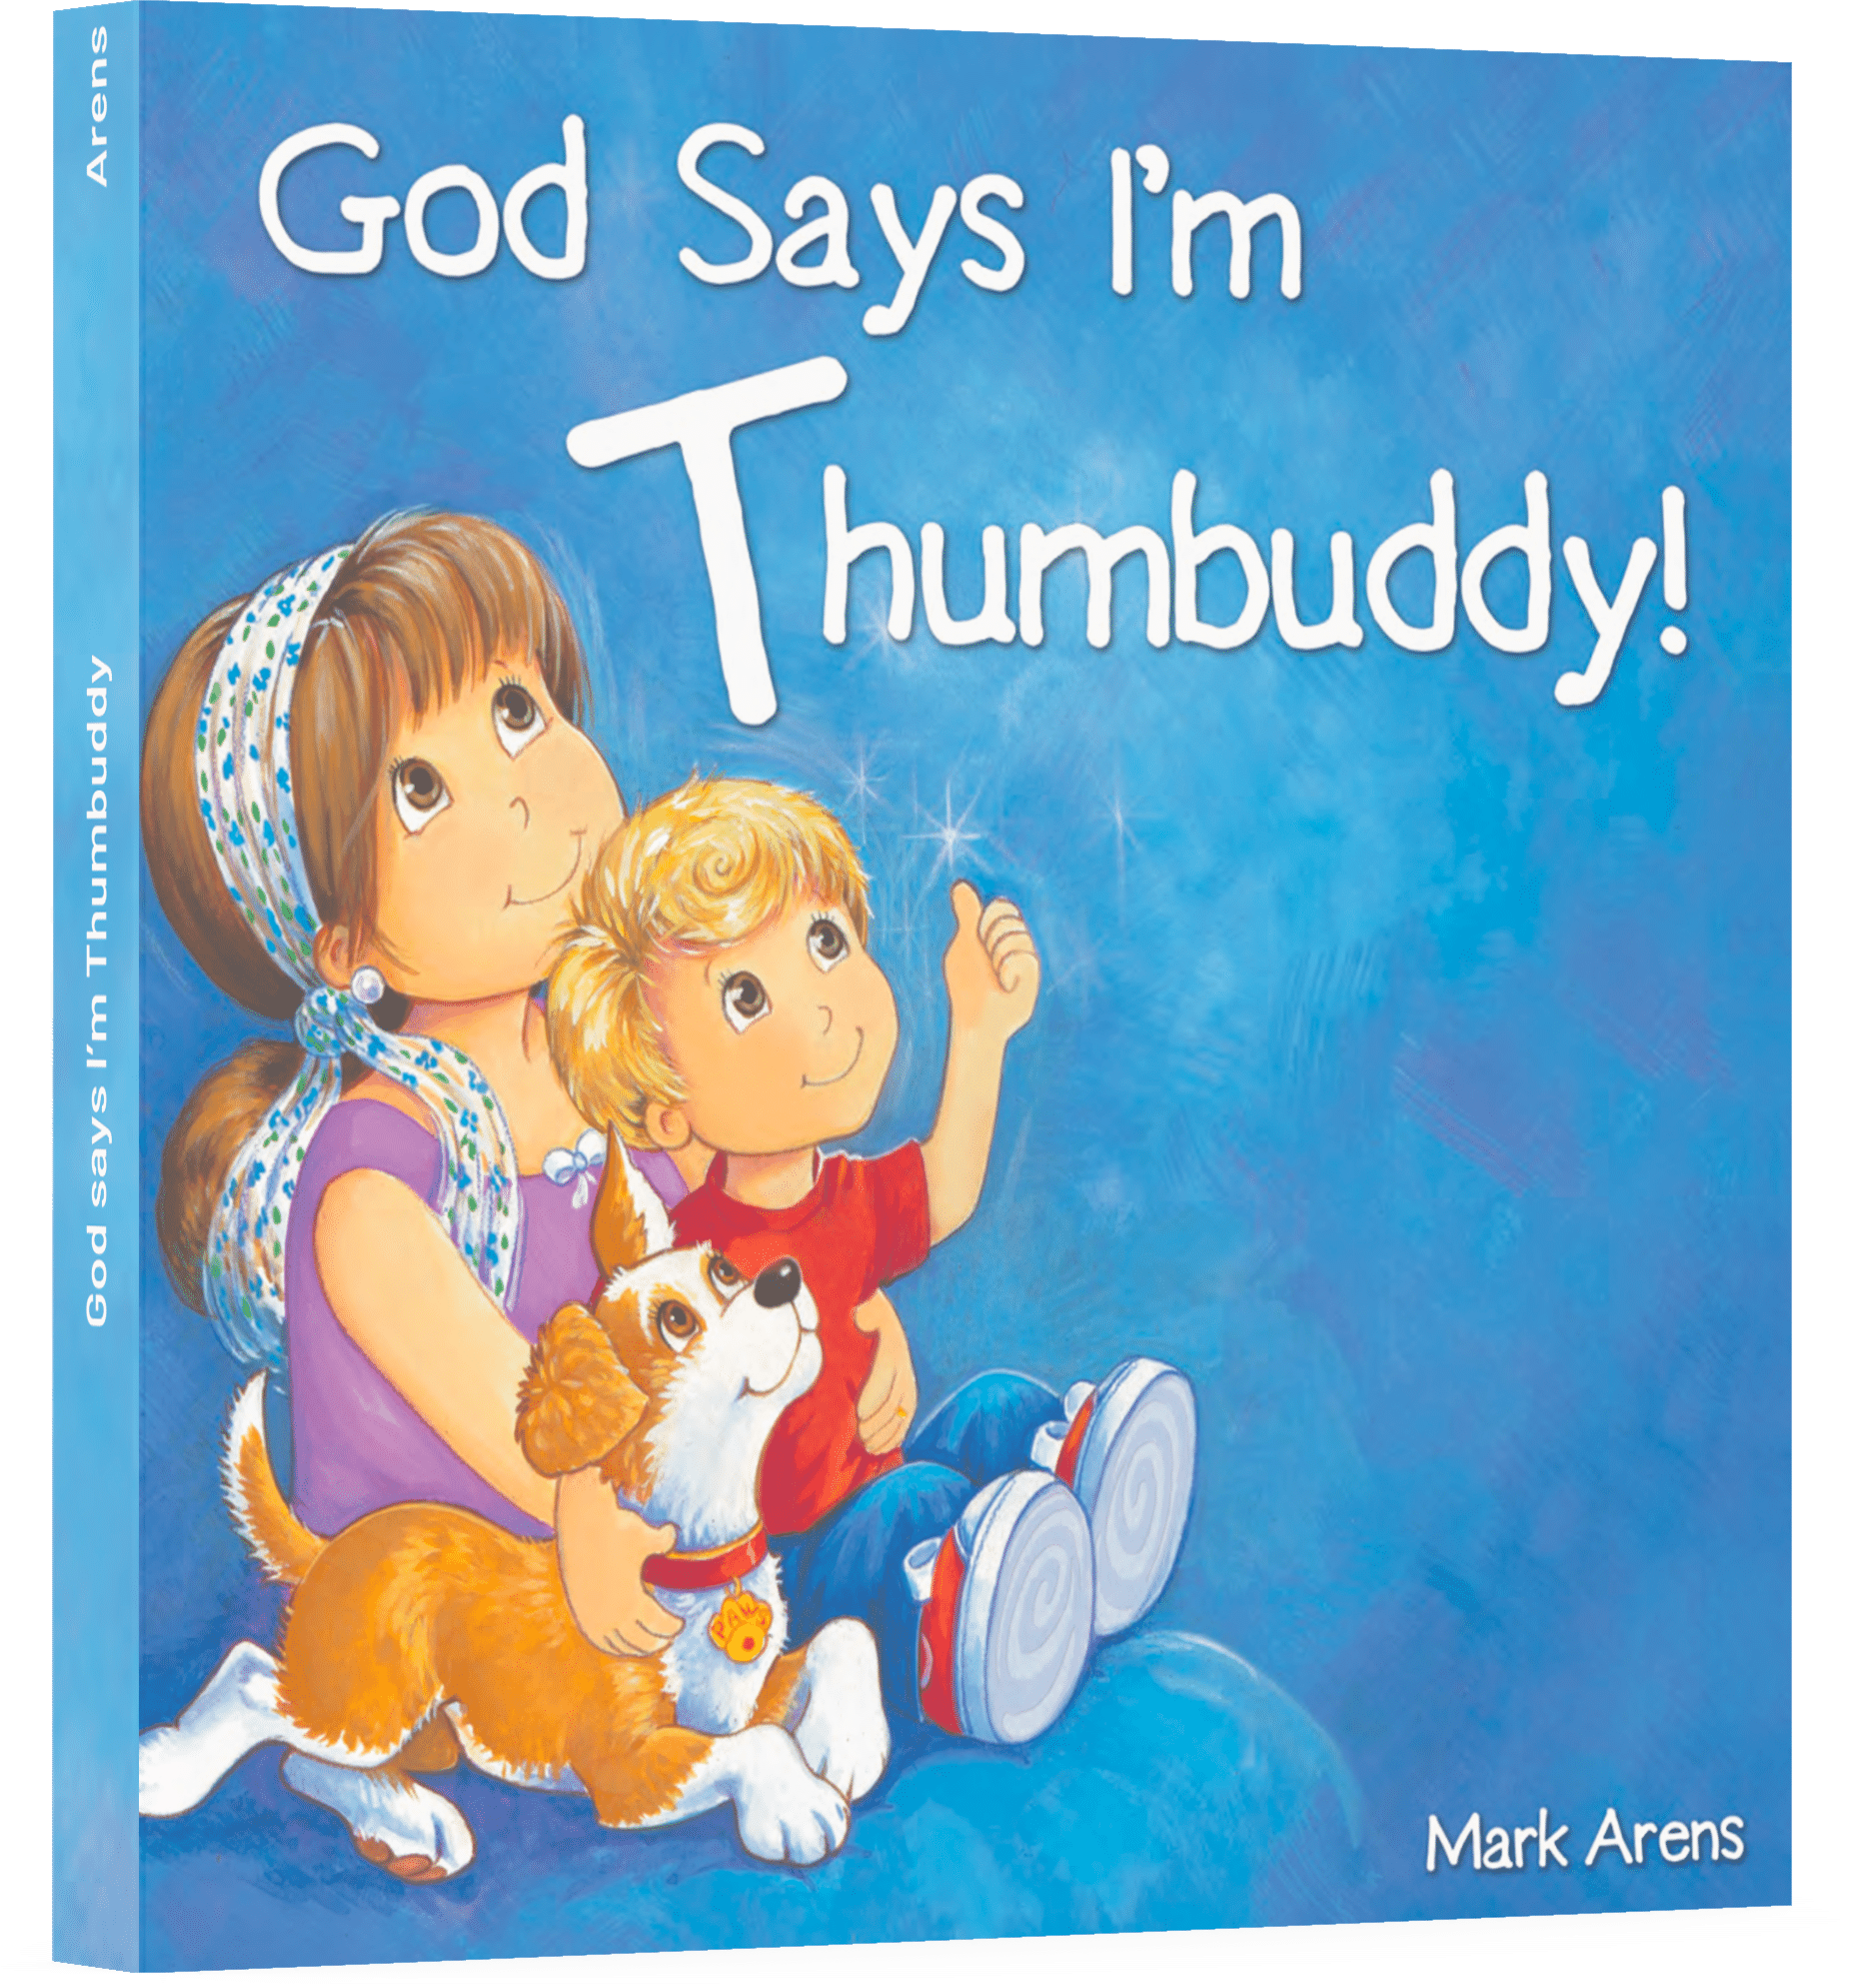 God Says I'm Thumbuddy christian book, how to teach your child about god